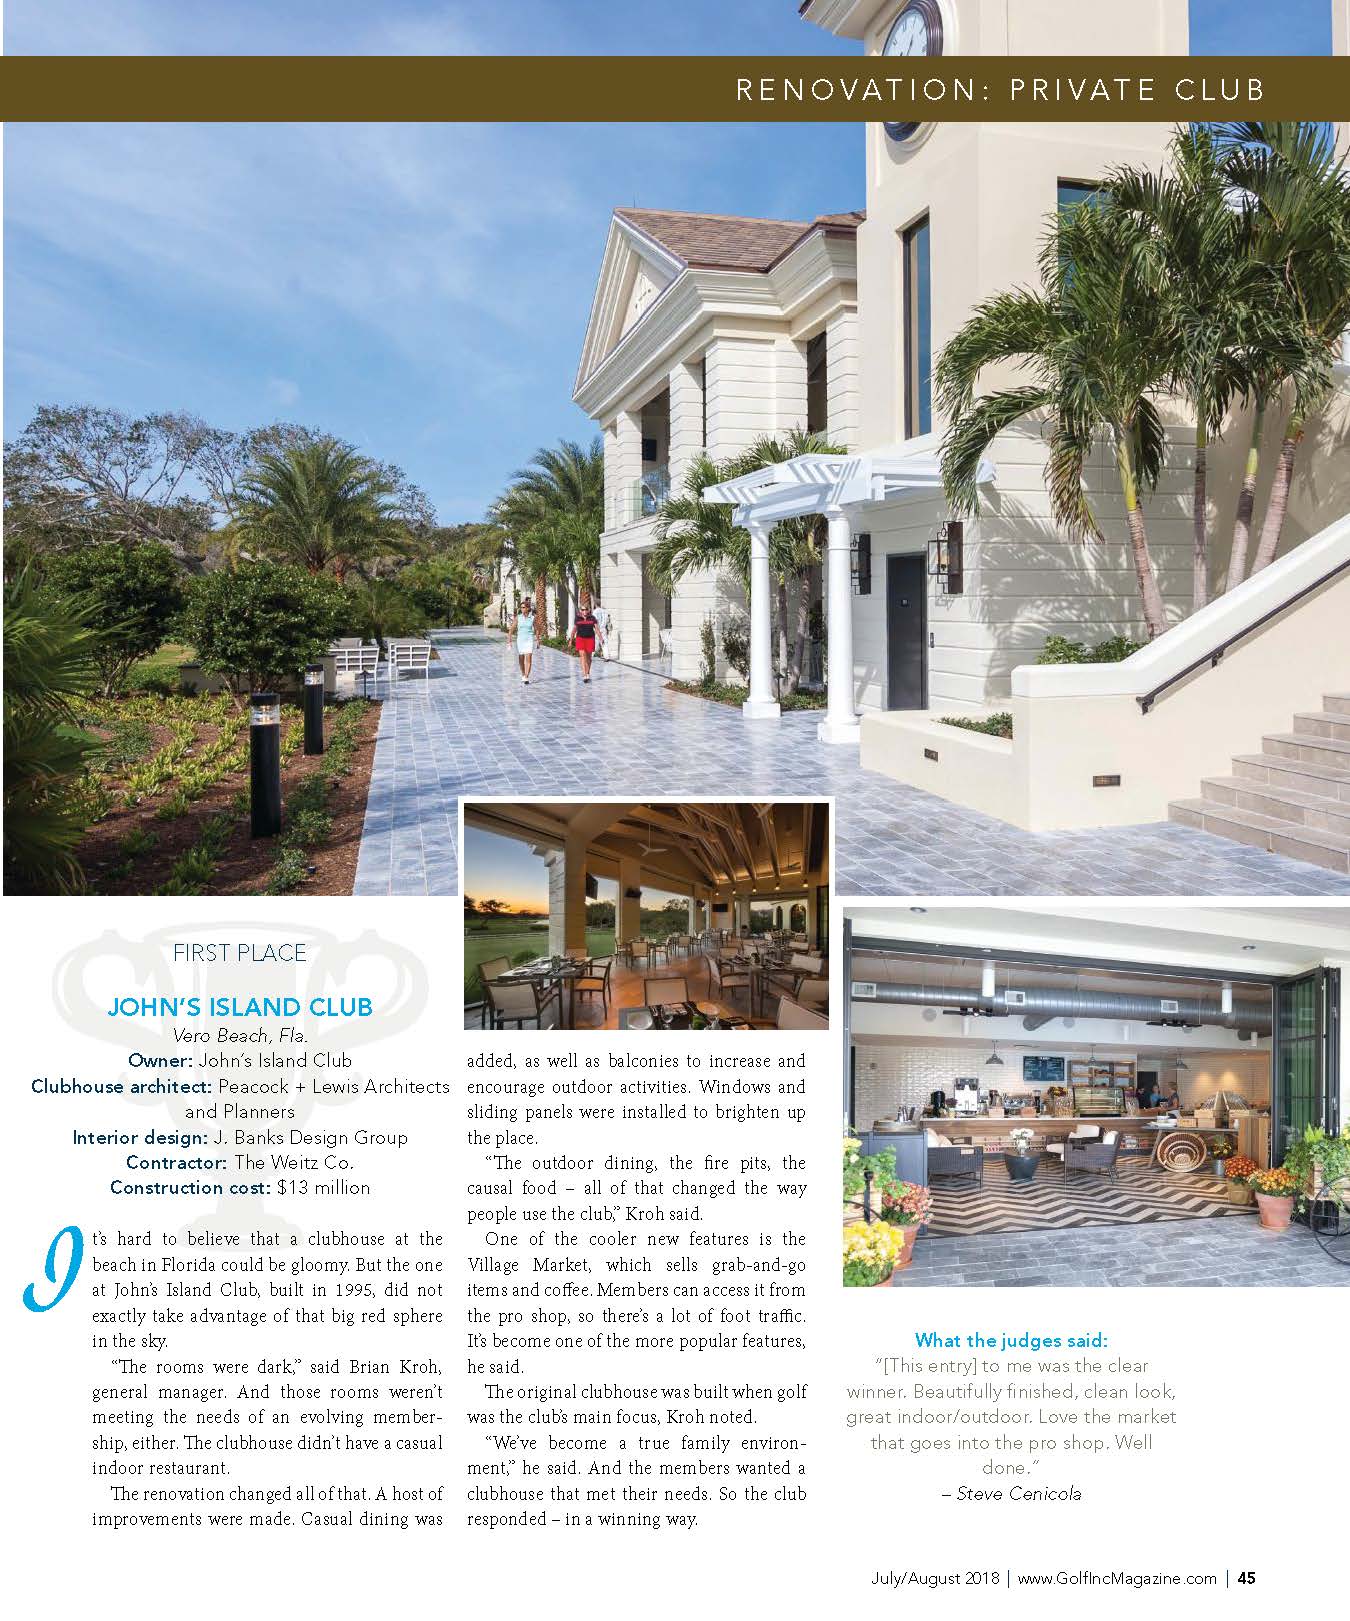 private club remodel award for johns island by j banks design group